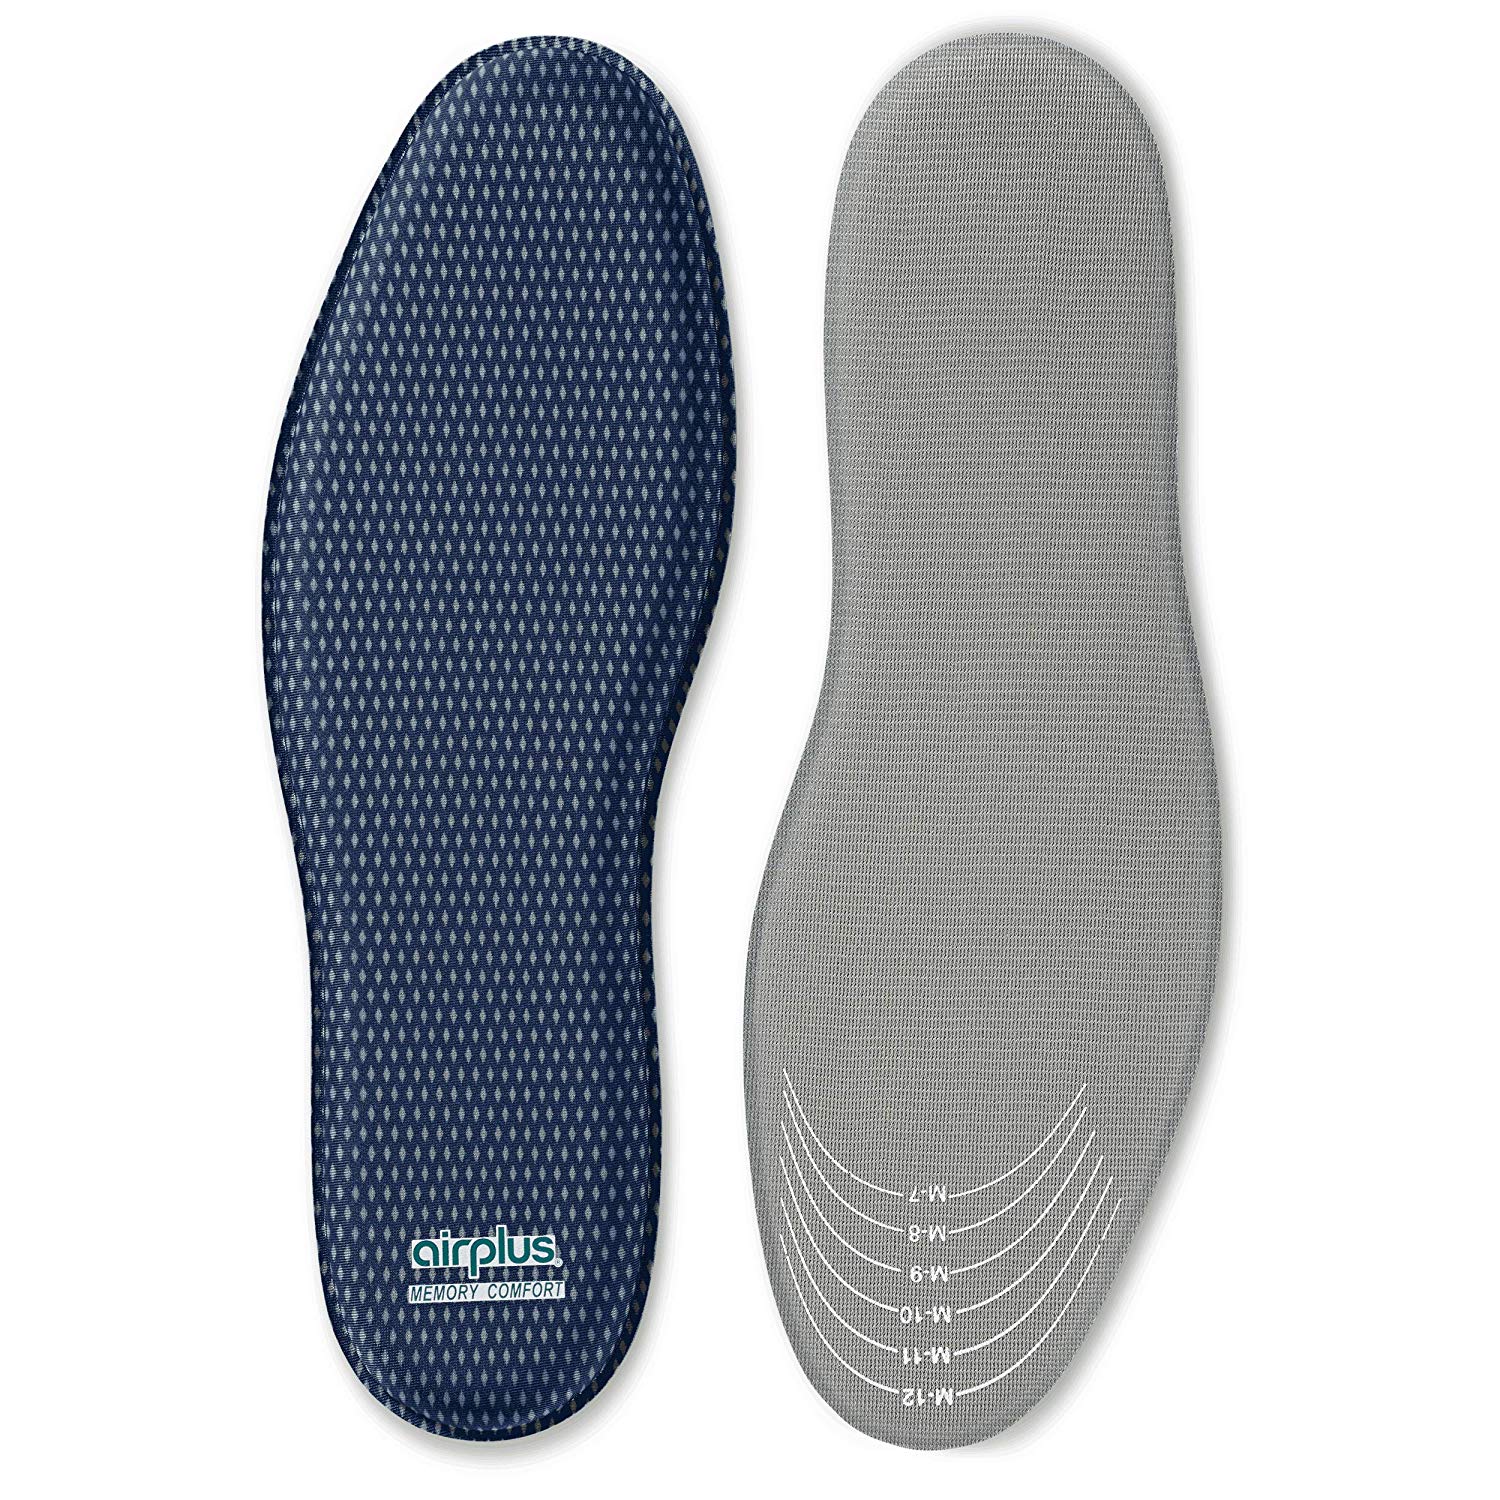 2 Pack Airplus Memory Comfort Shoe Insoles with Memory Foam, Mens, Size ...